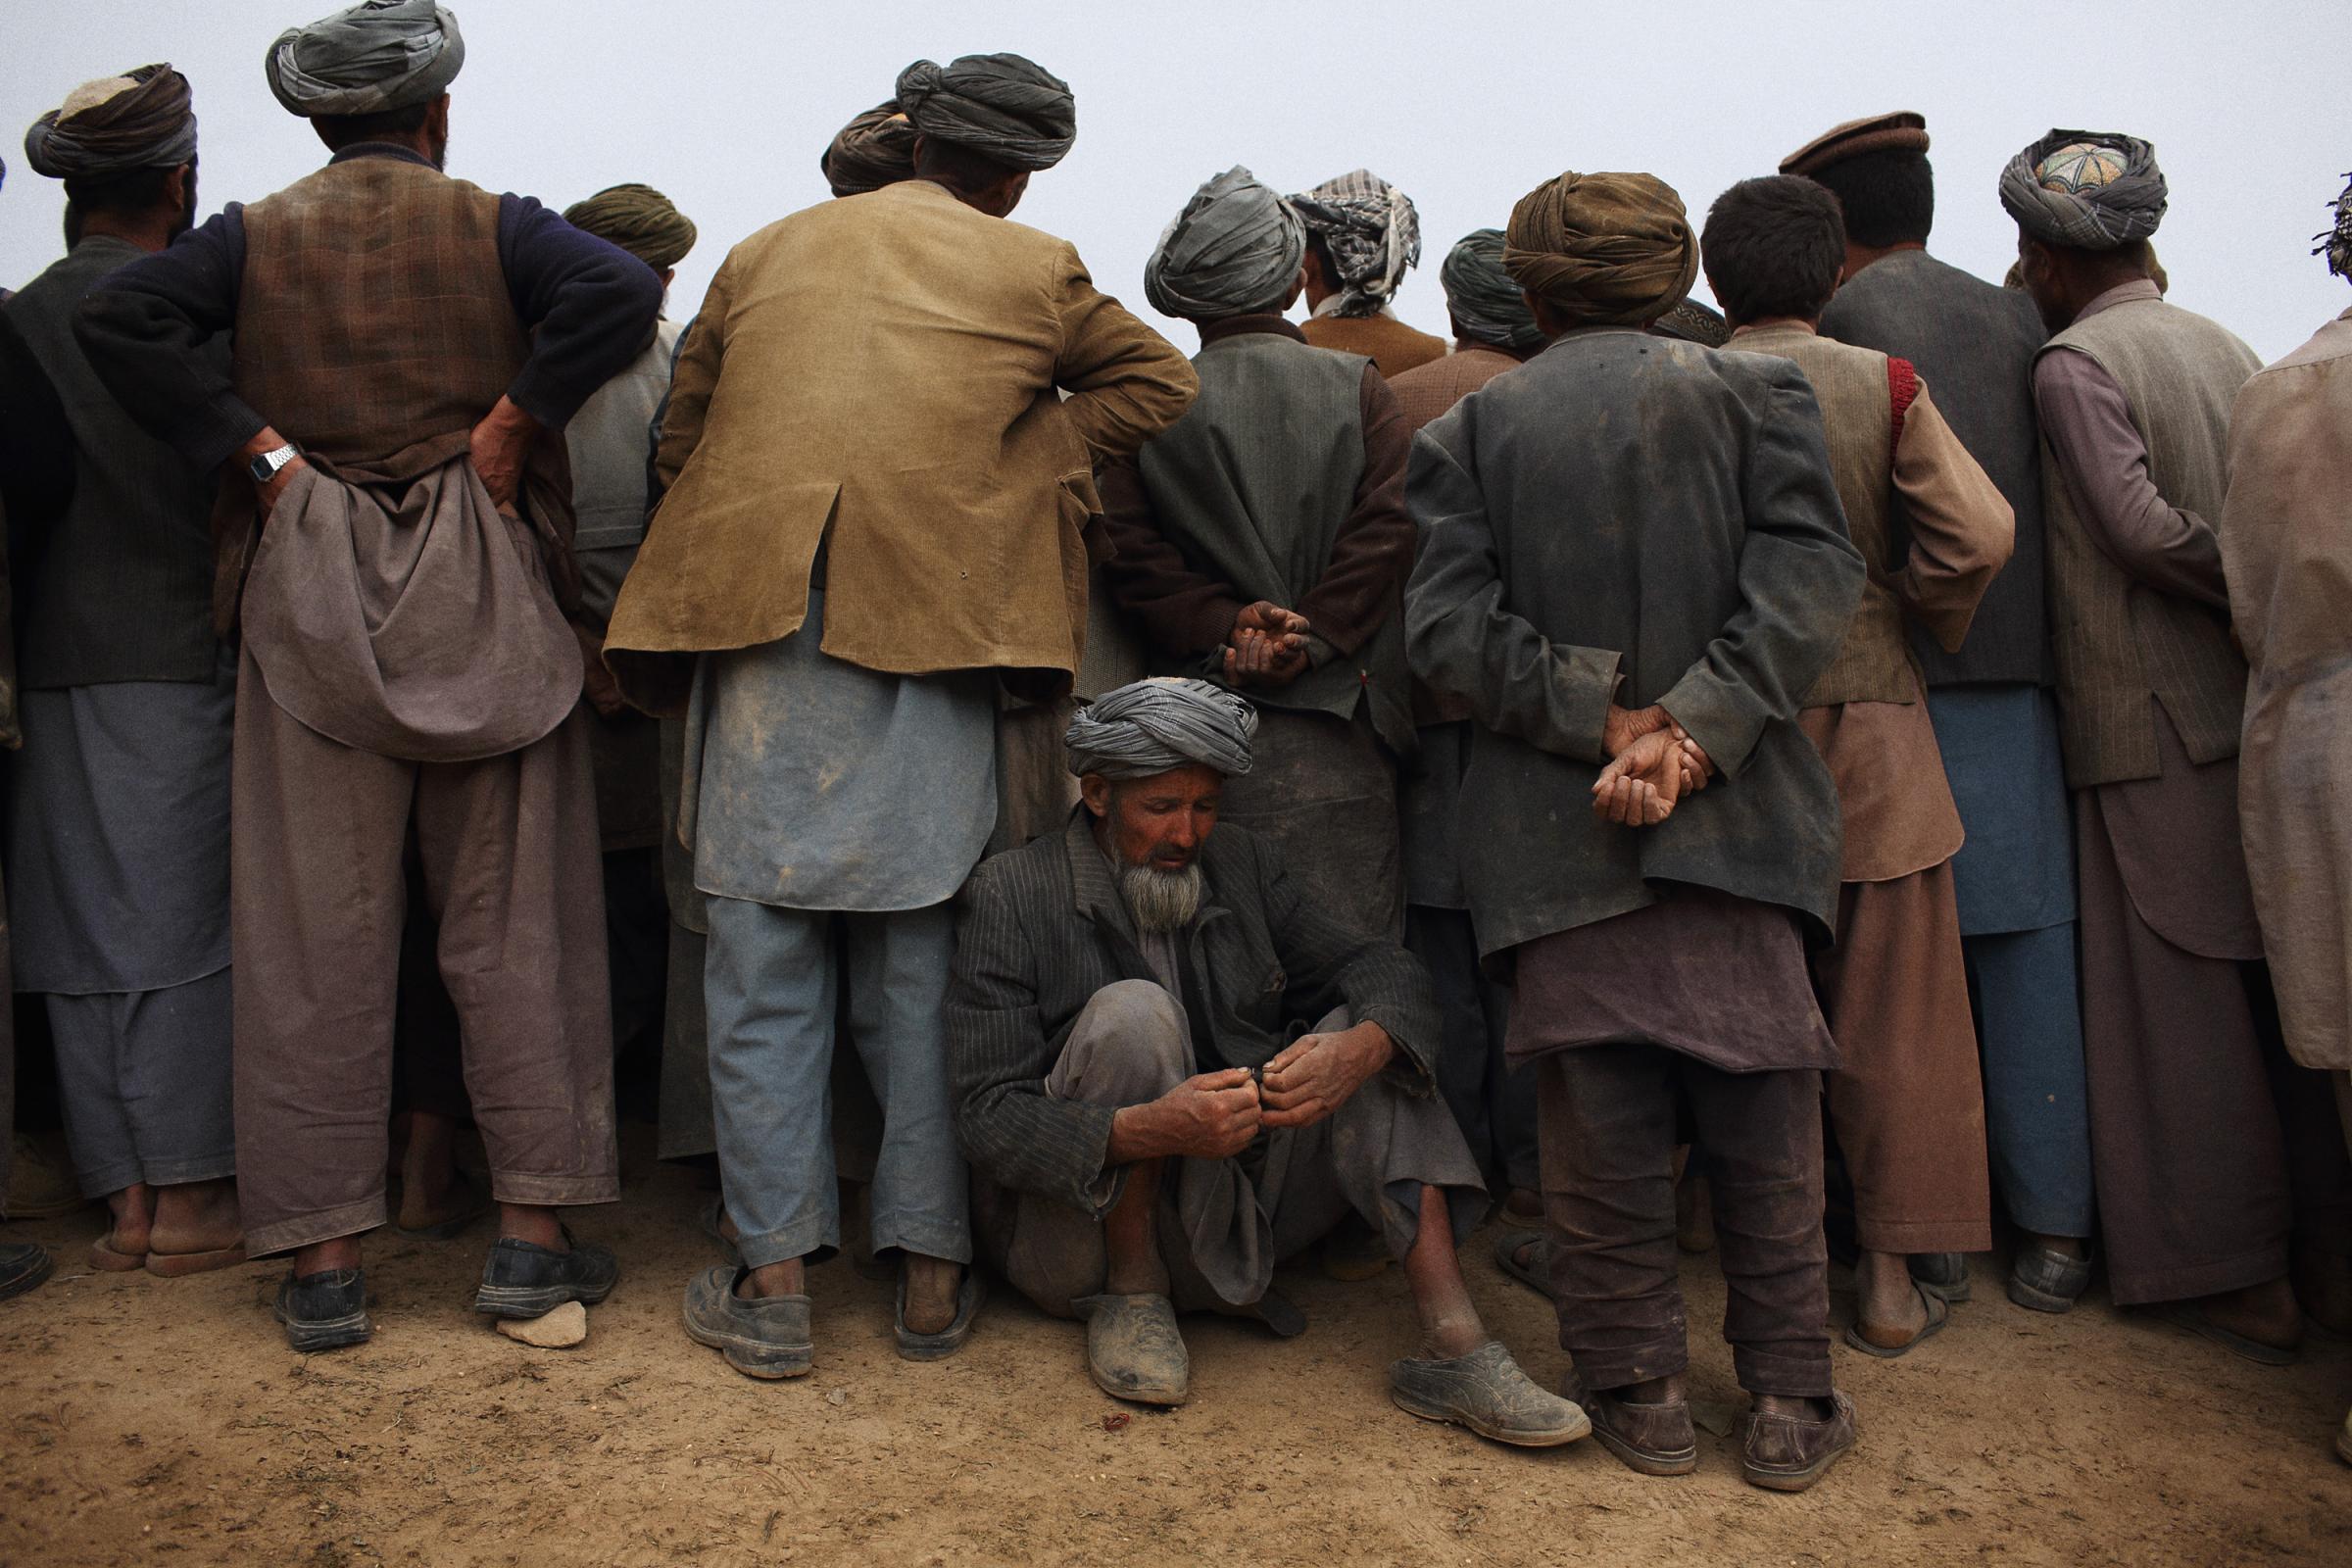 A meeting is held in the center of the village following clashes between police and locals, May 6, 2014.